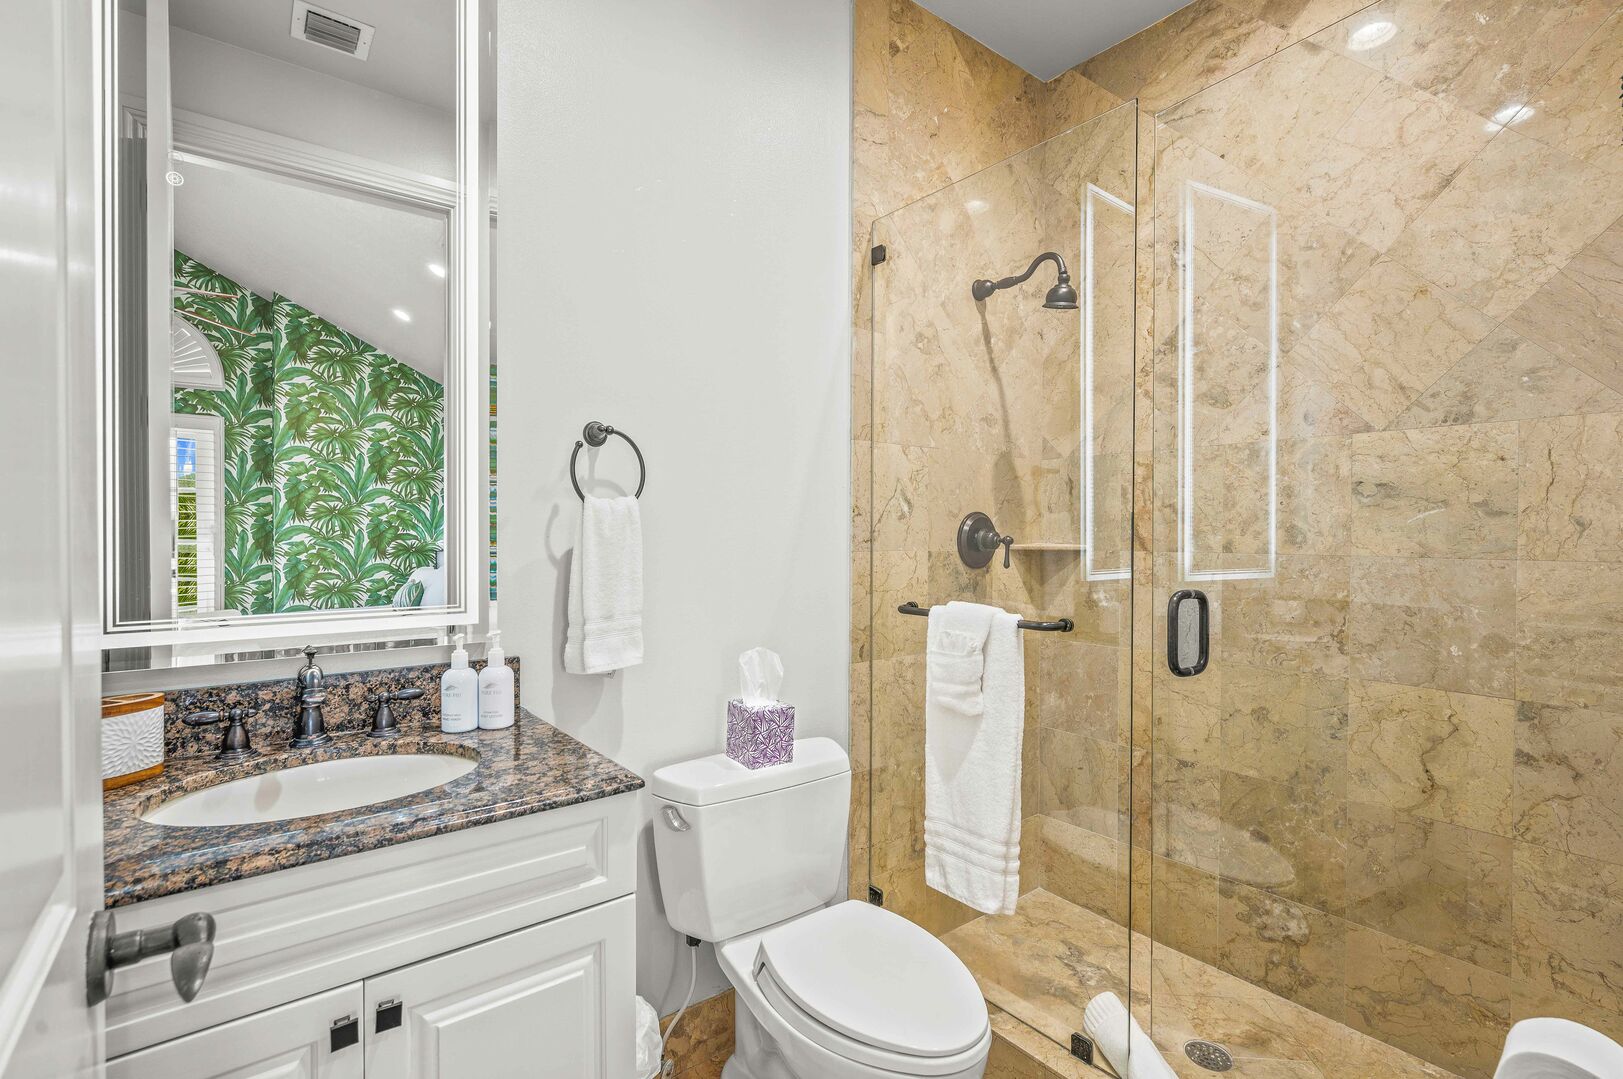 The fifth bedroom's bathroom features a walk-in shower.